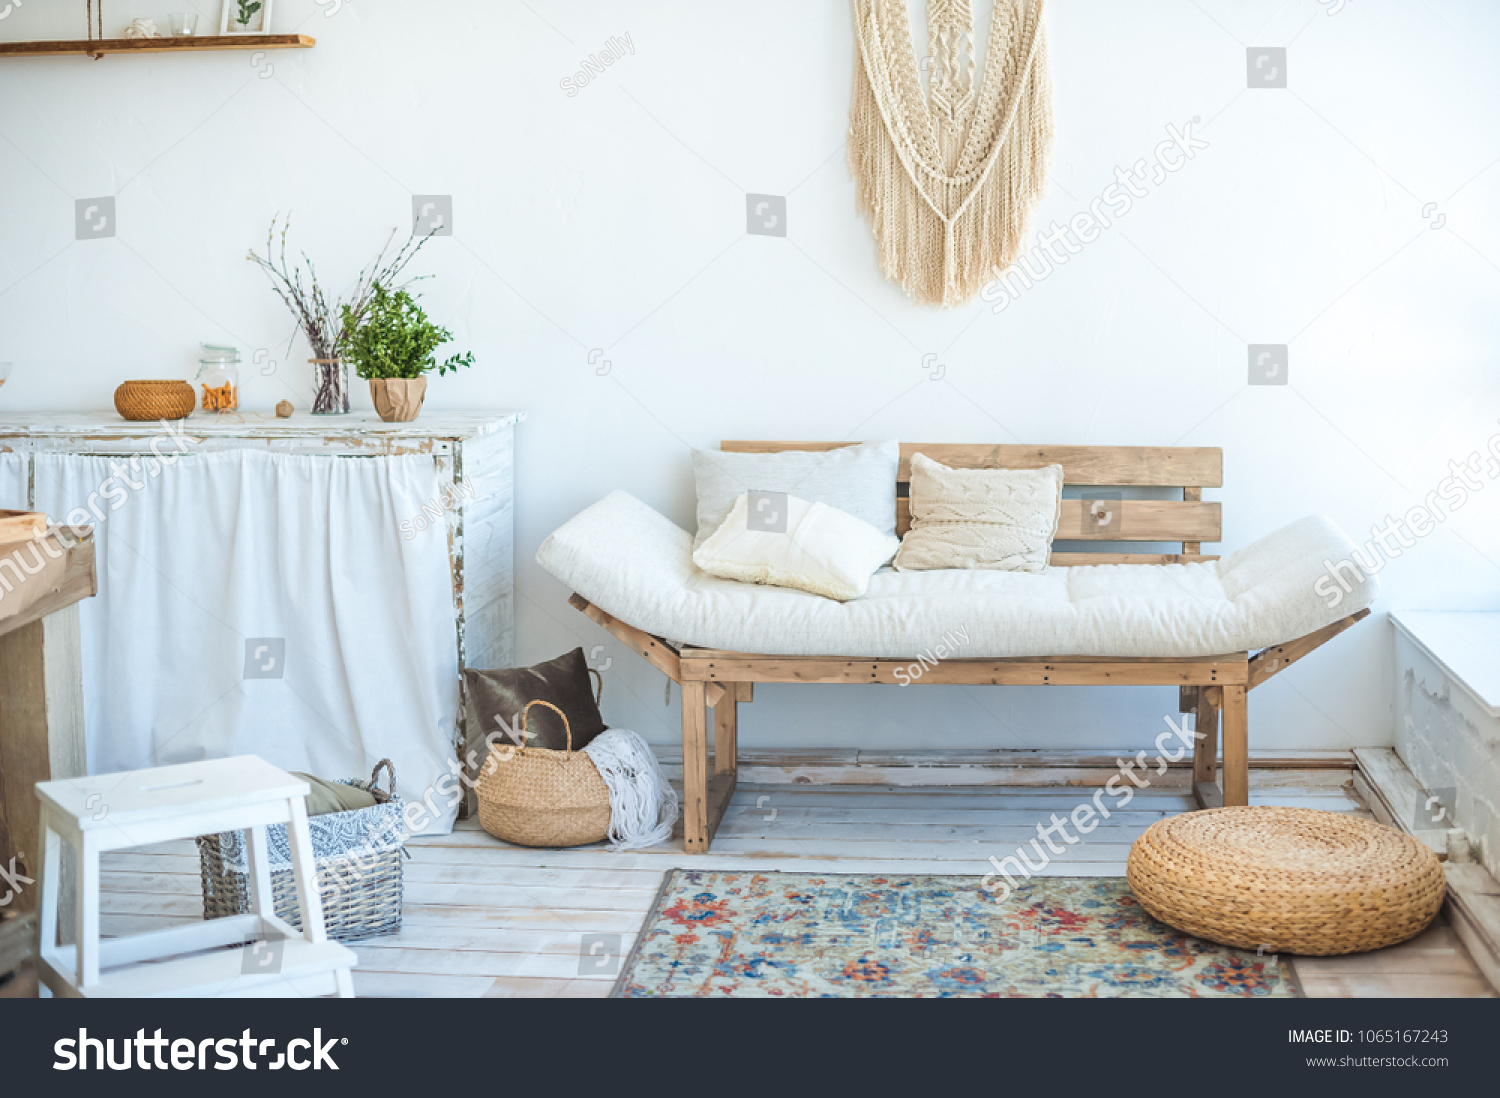 Beautiful spring photo of kitchen interior in light textured colors. Kitchen, living room with beige couch sofa, large cactus and woven macrame on the wall #1065167243